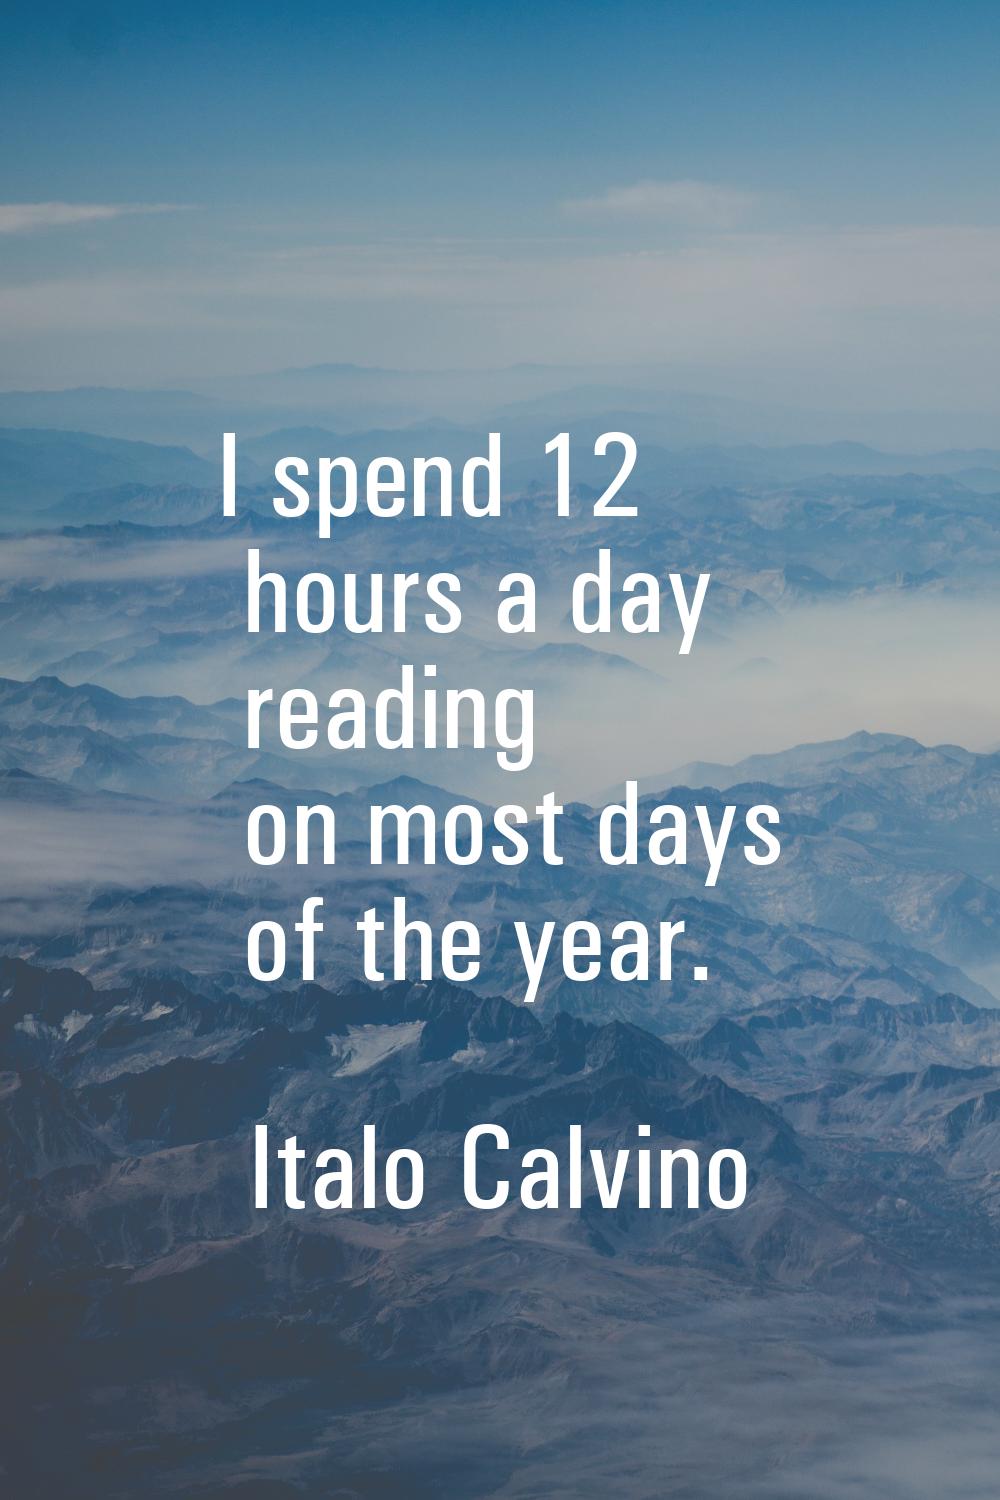 I spend 12 hours a day reading on most days of the year.